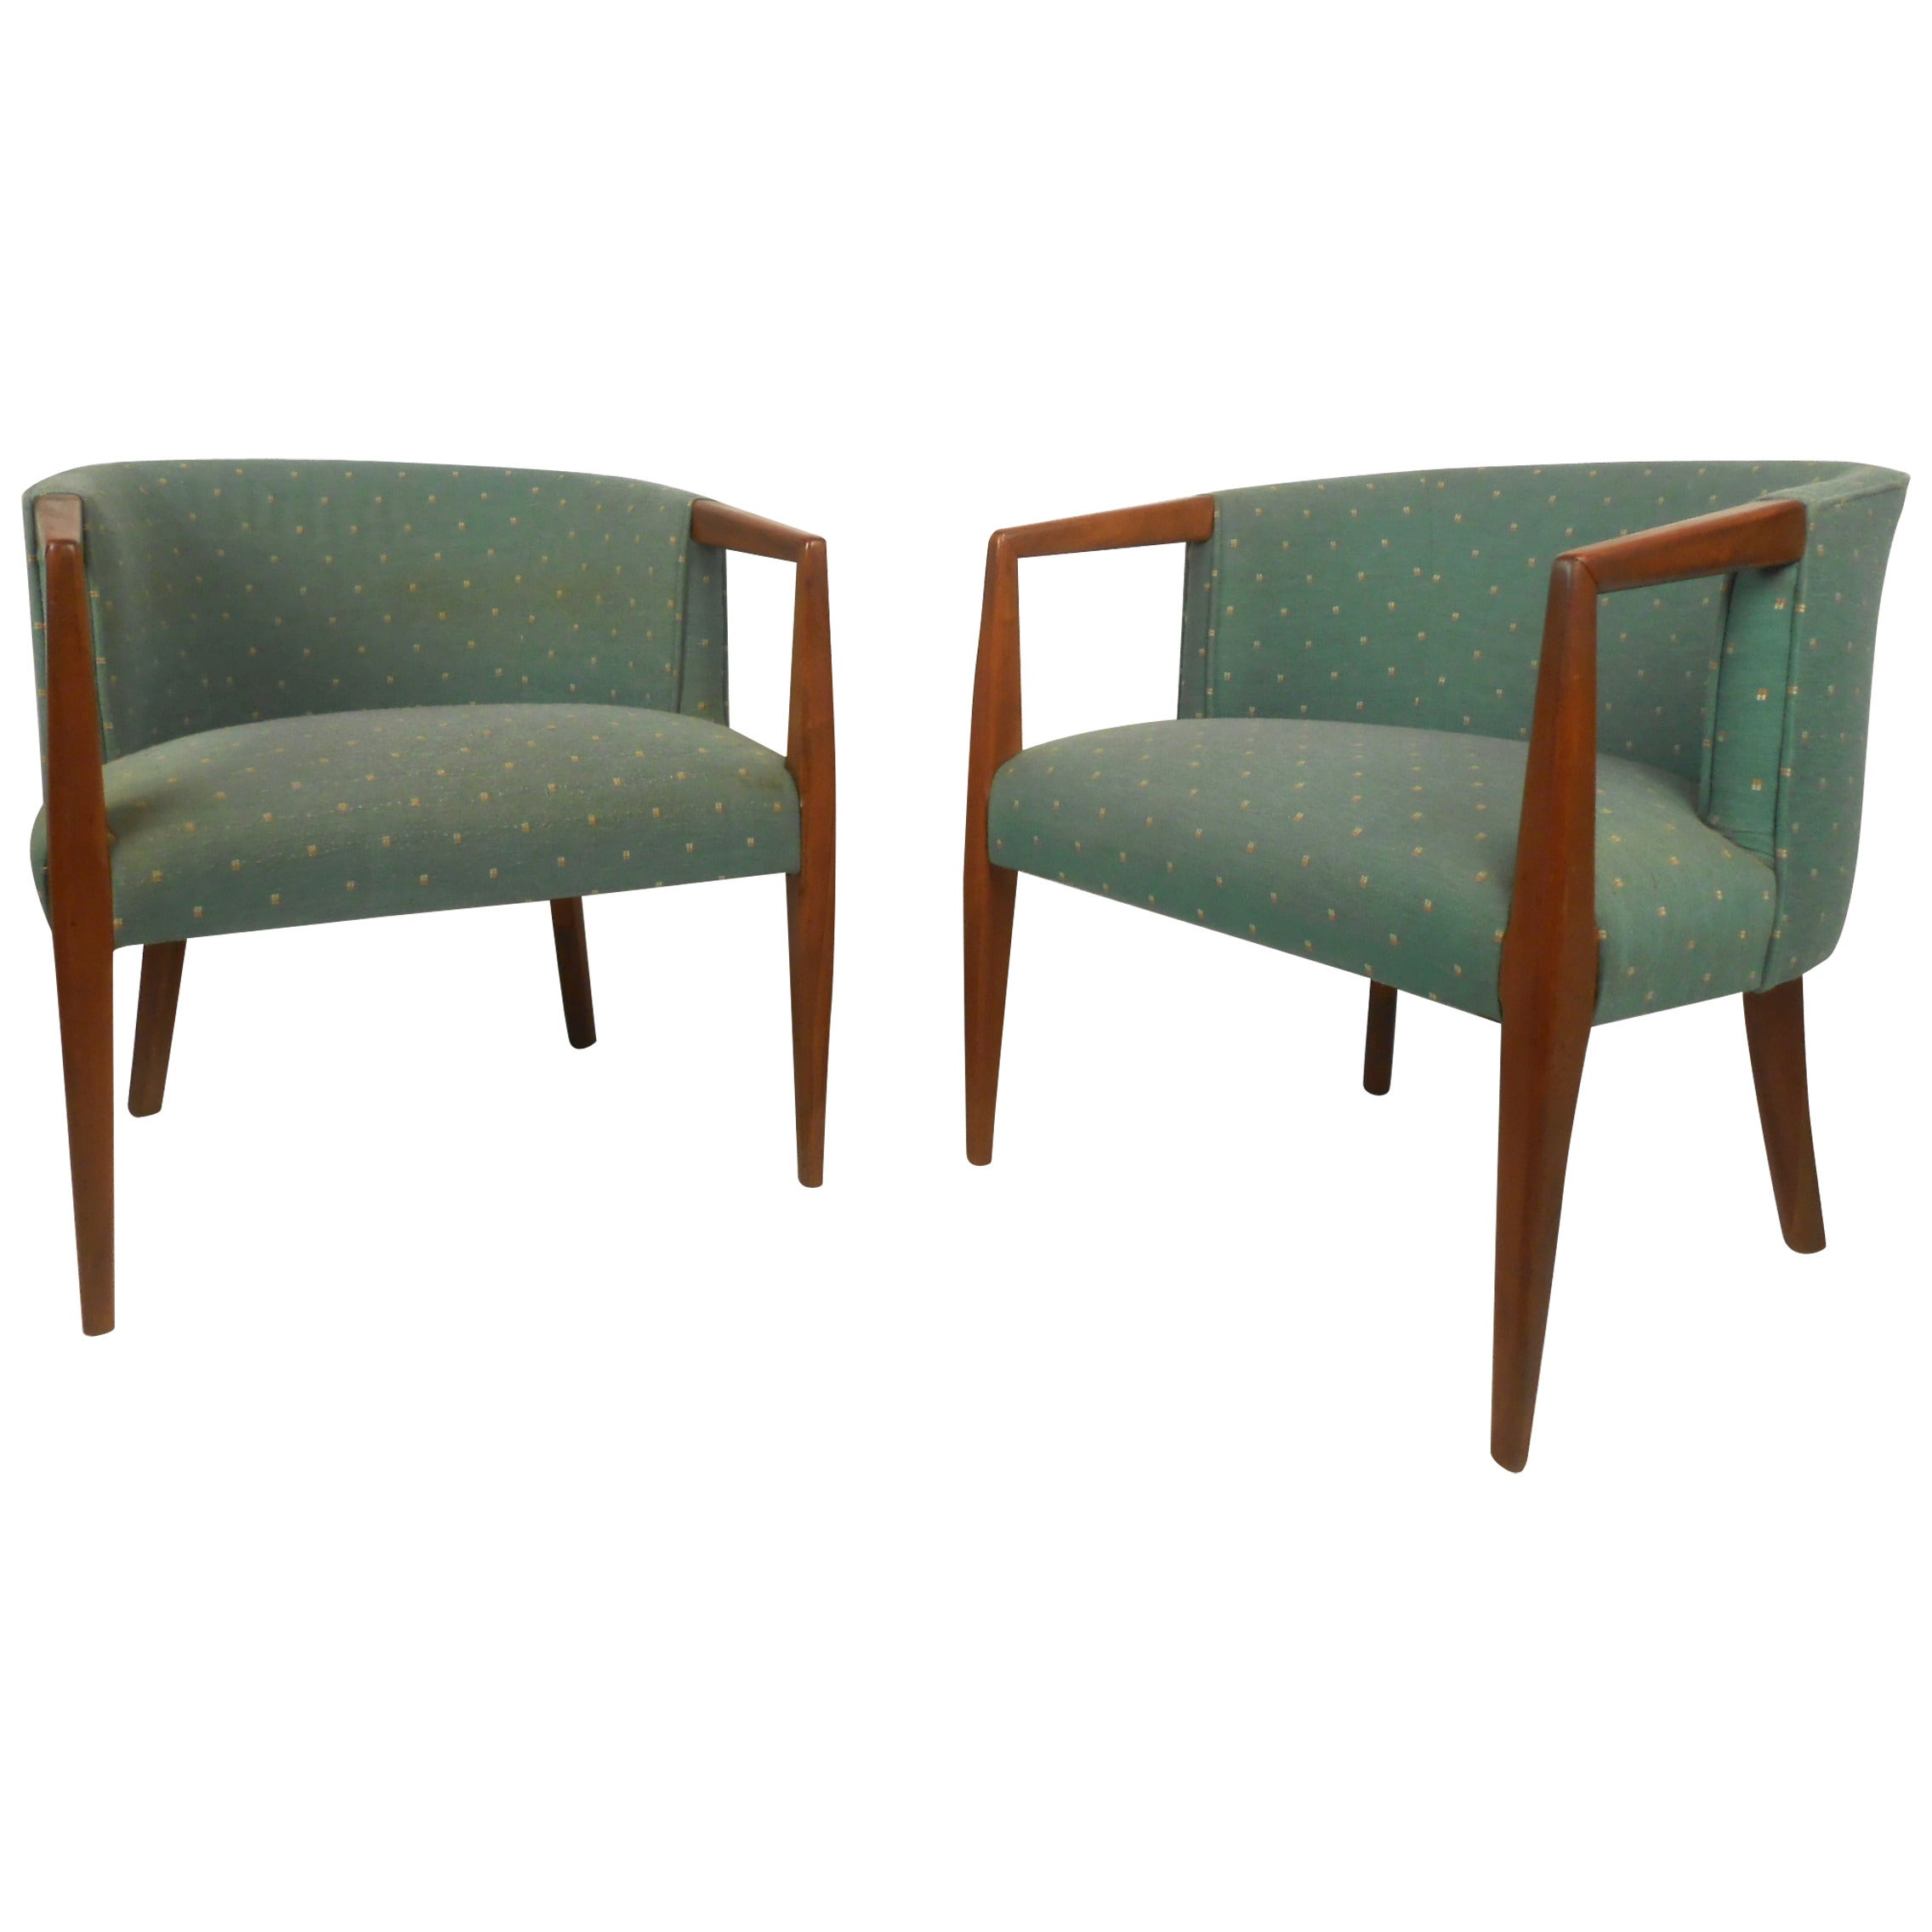 Pair of Midcentury Lounge Chairs with Walnut Frames